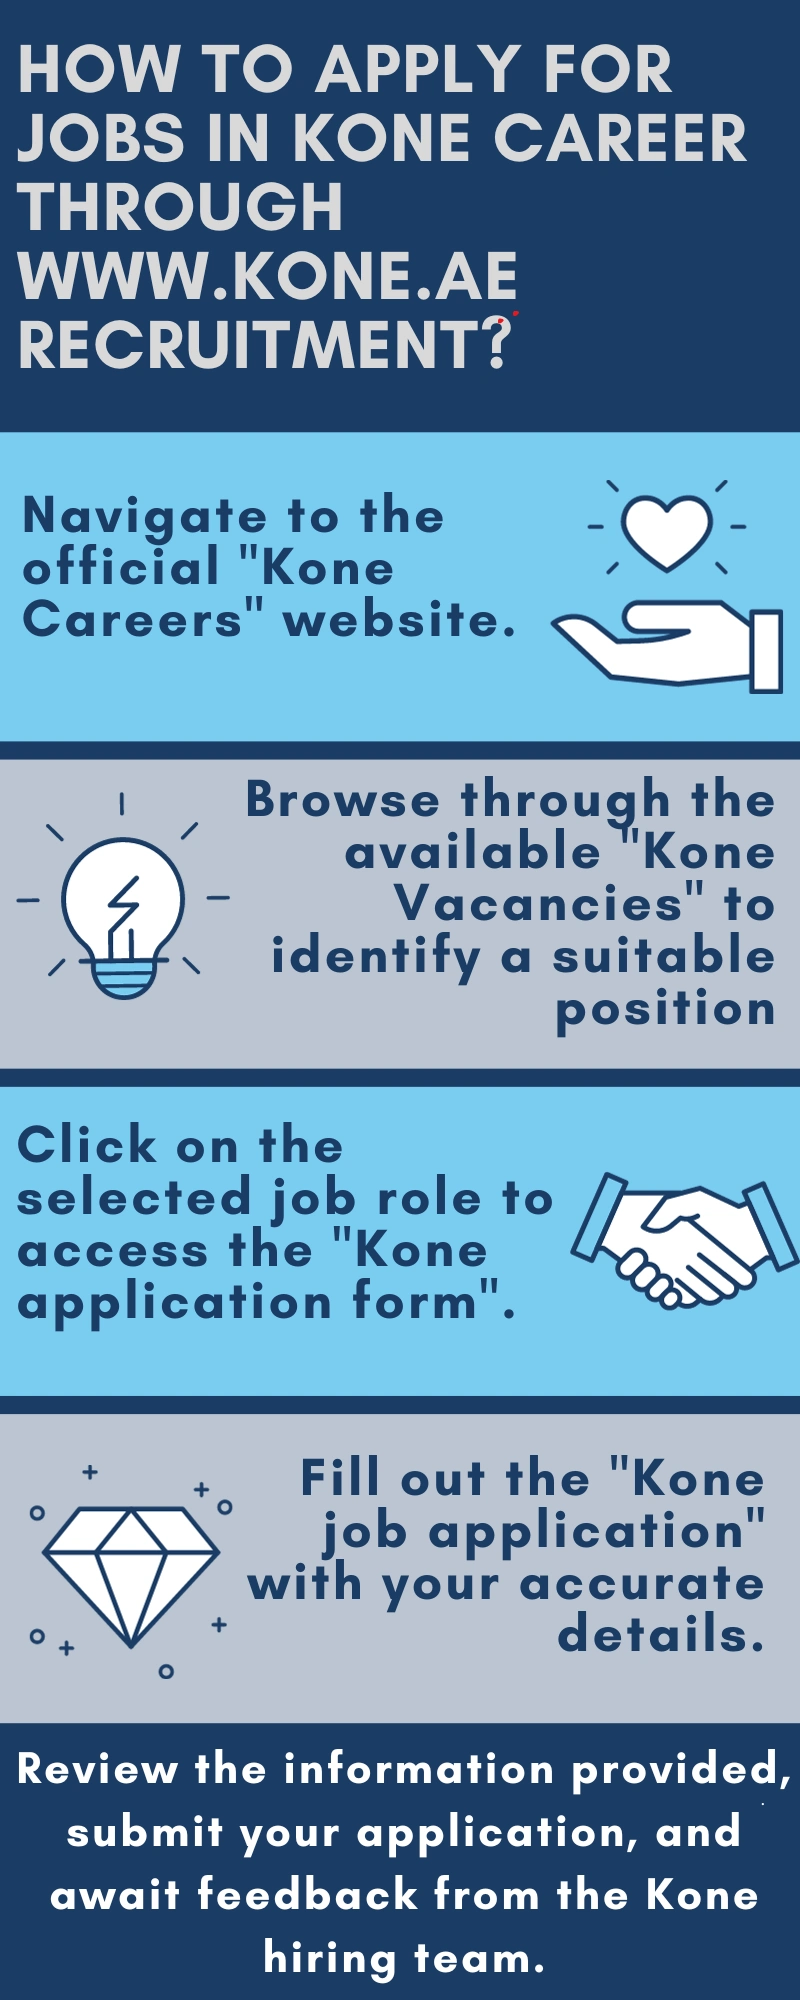 How to Apply for Jobs in Kone Career through www.kone.ae recruitment?